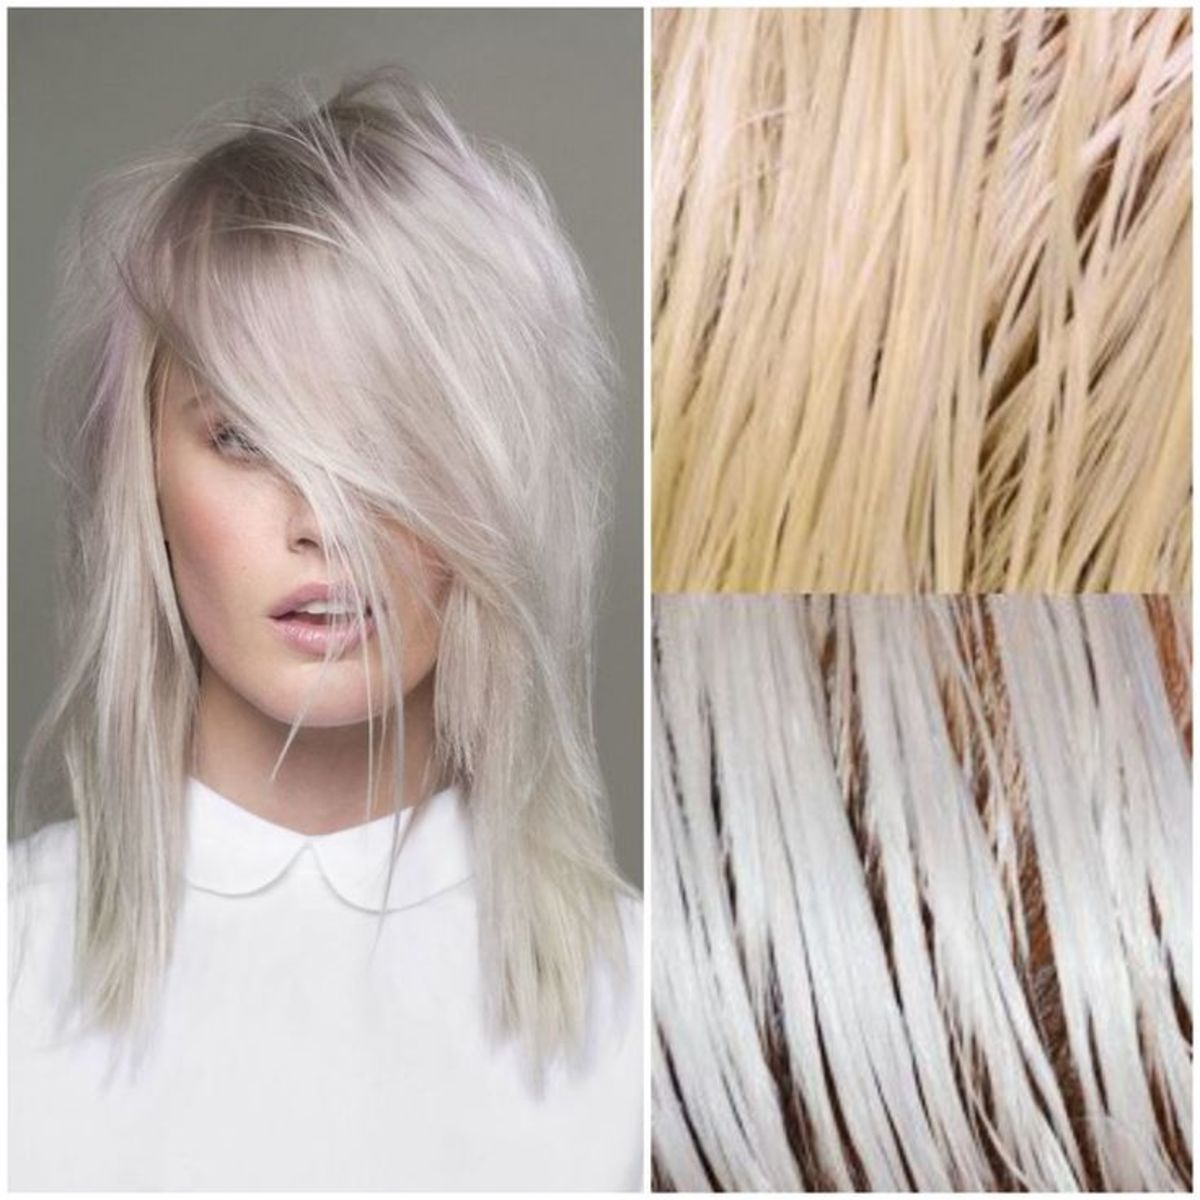 Toner can help balance your color out and adjust the tone